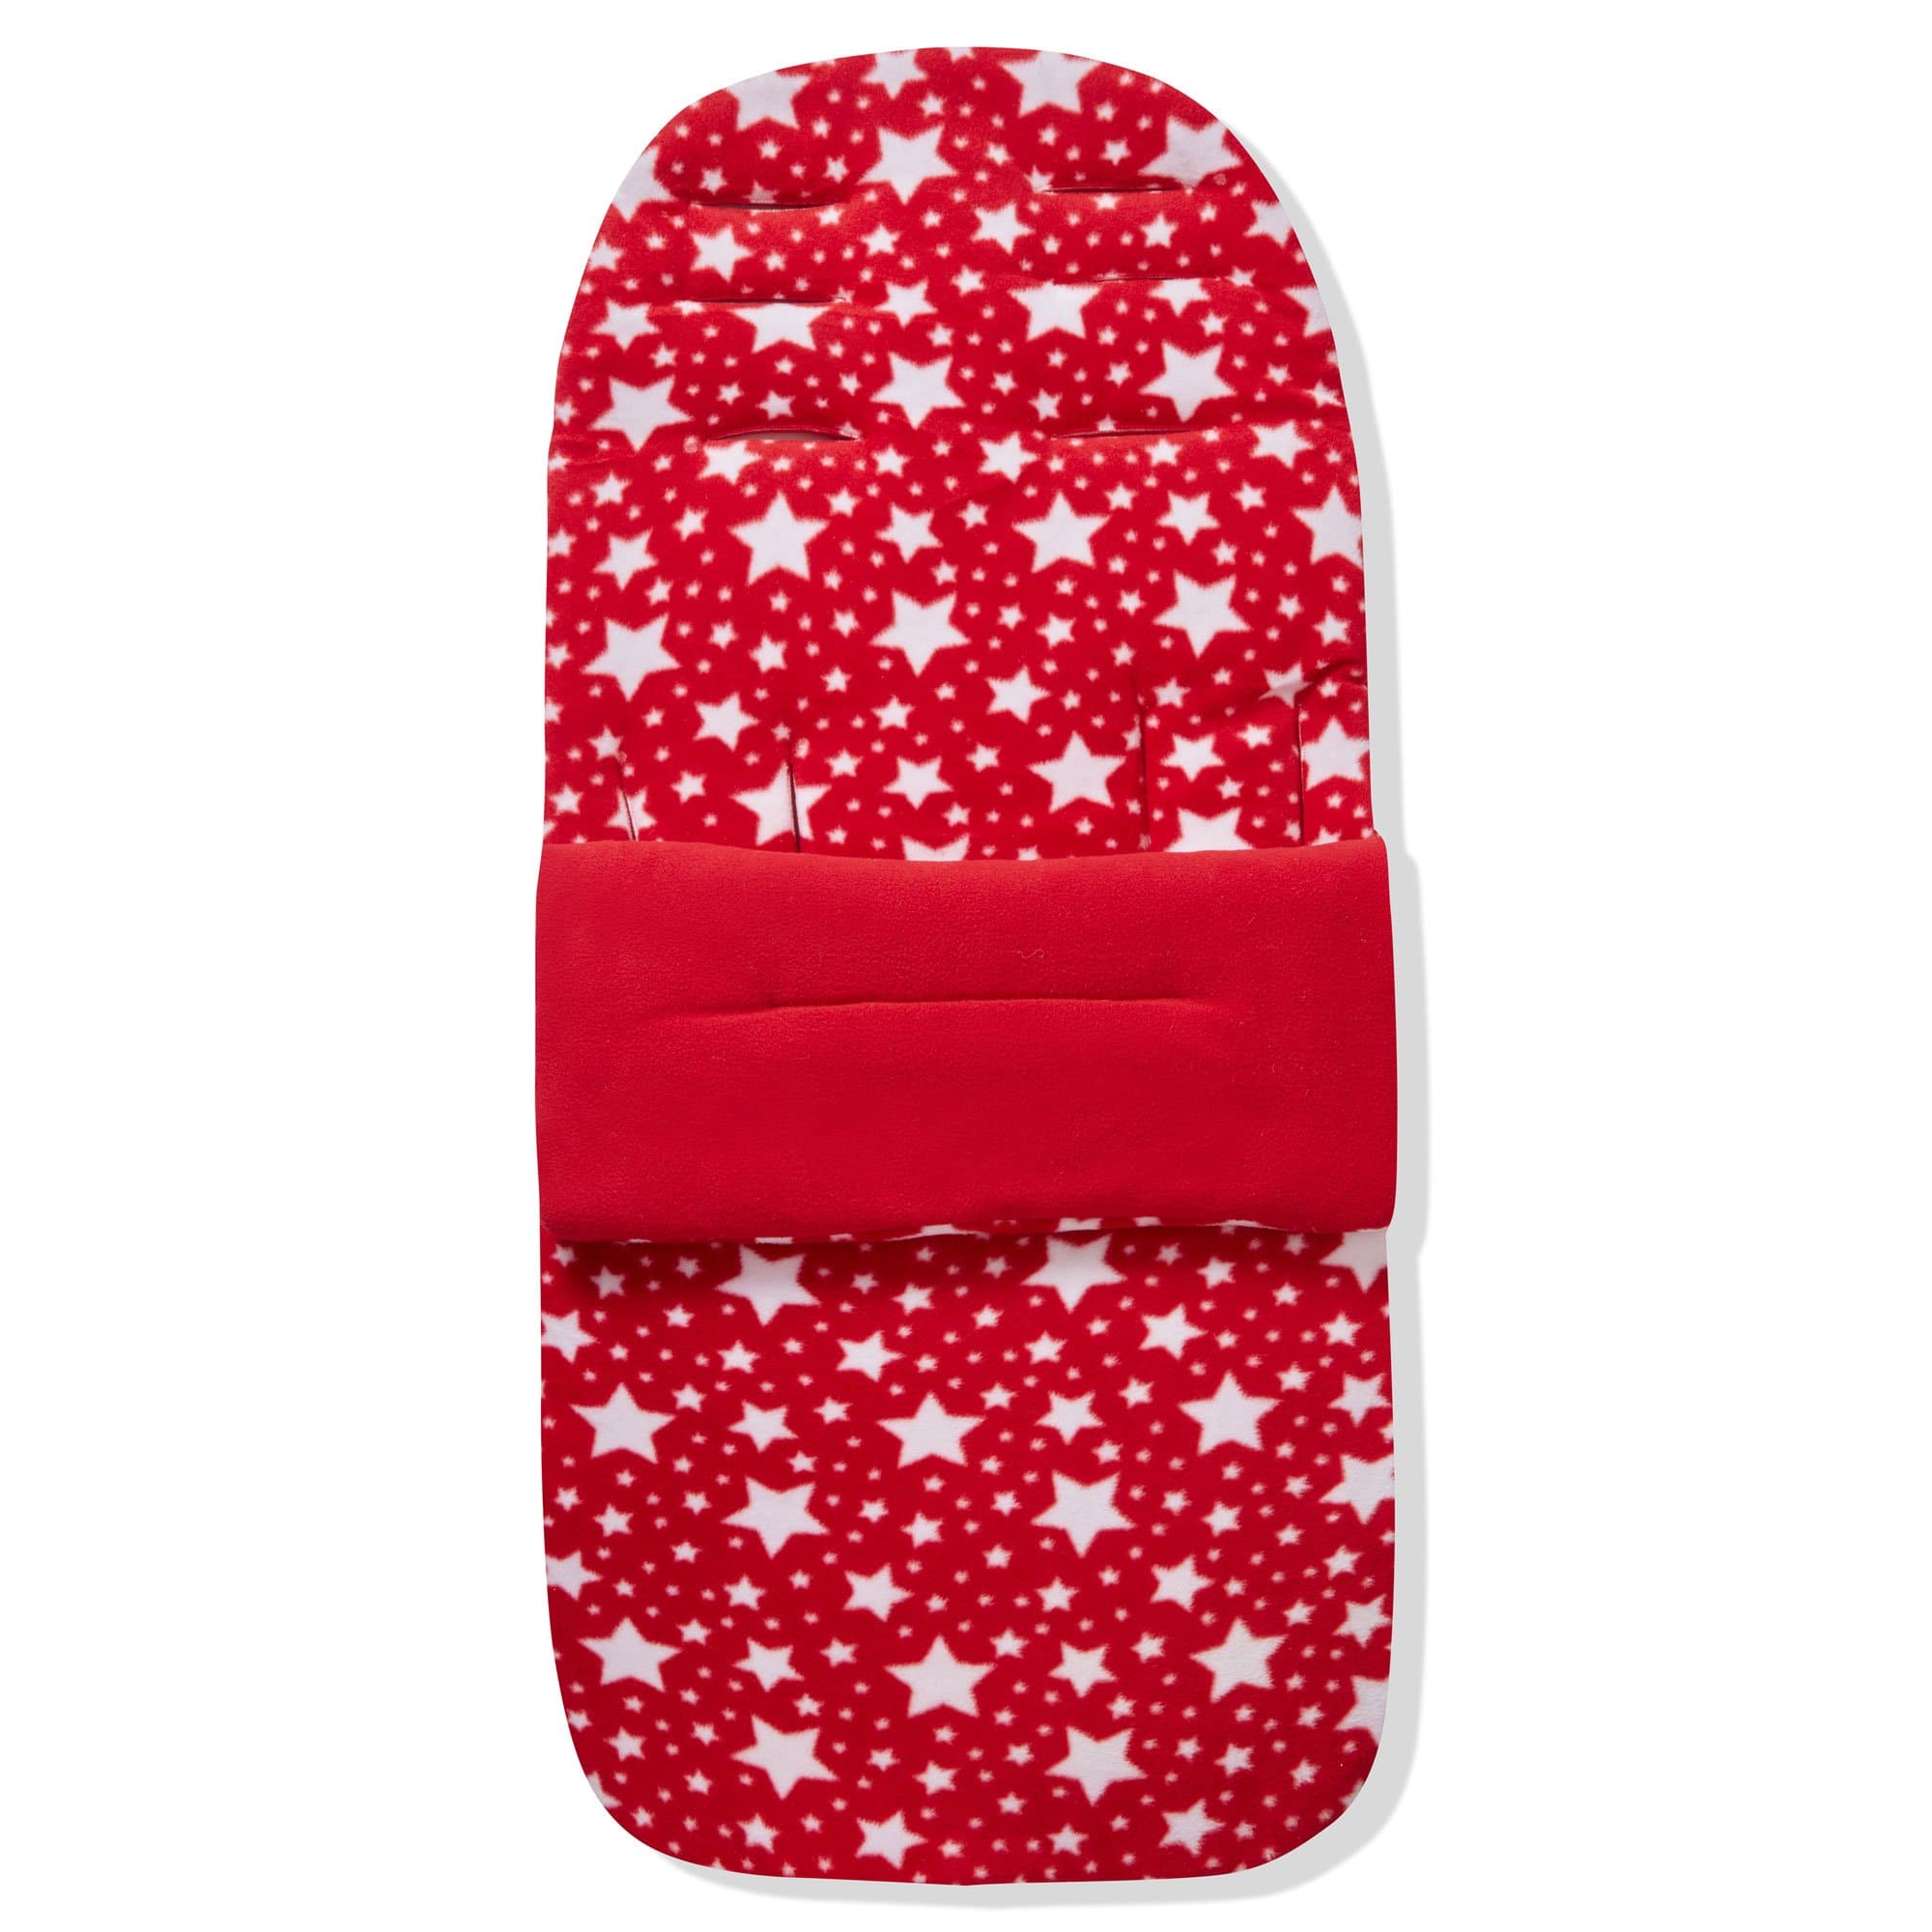 Fleece Footmuff / Cosy Toes Compatible with Joolz - Red Star / Fits All Models | For Your Little One